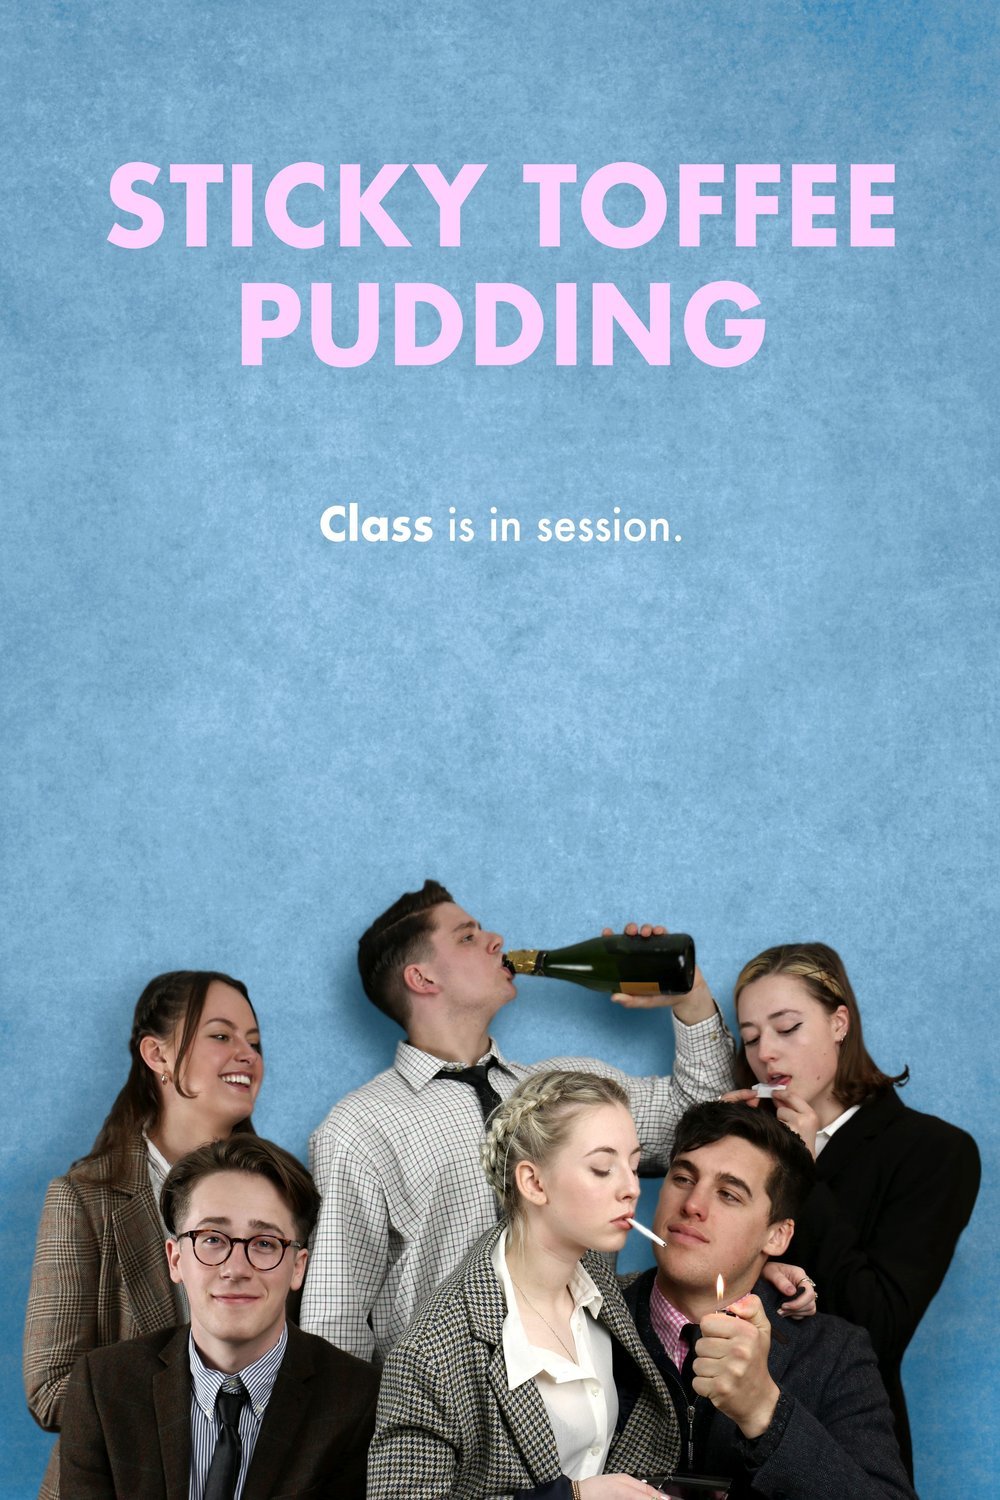 Poster of the movie Sticky Toffee Pudding